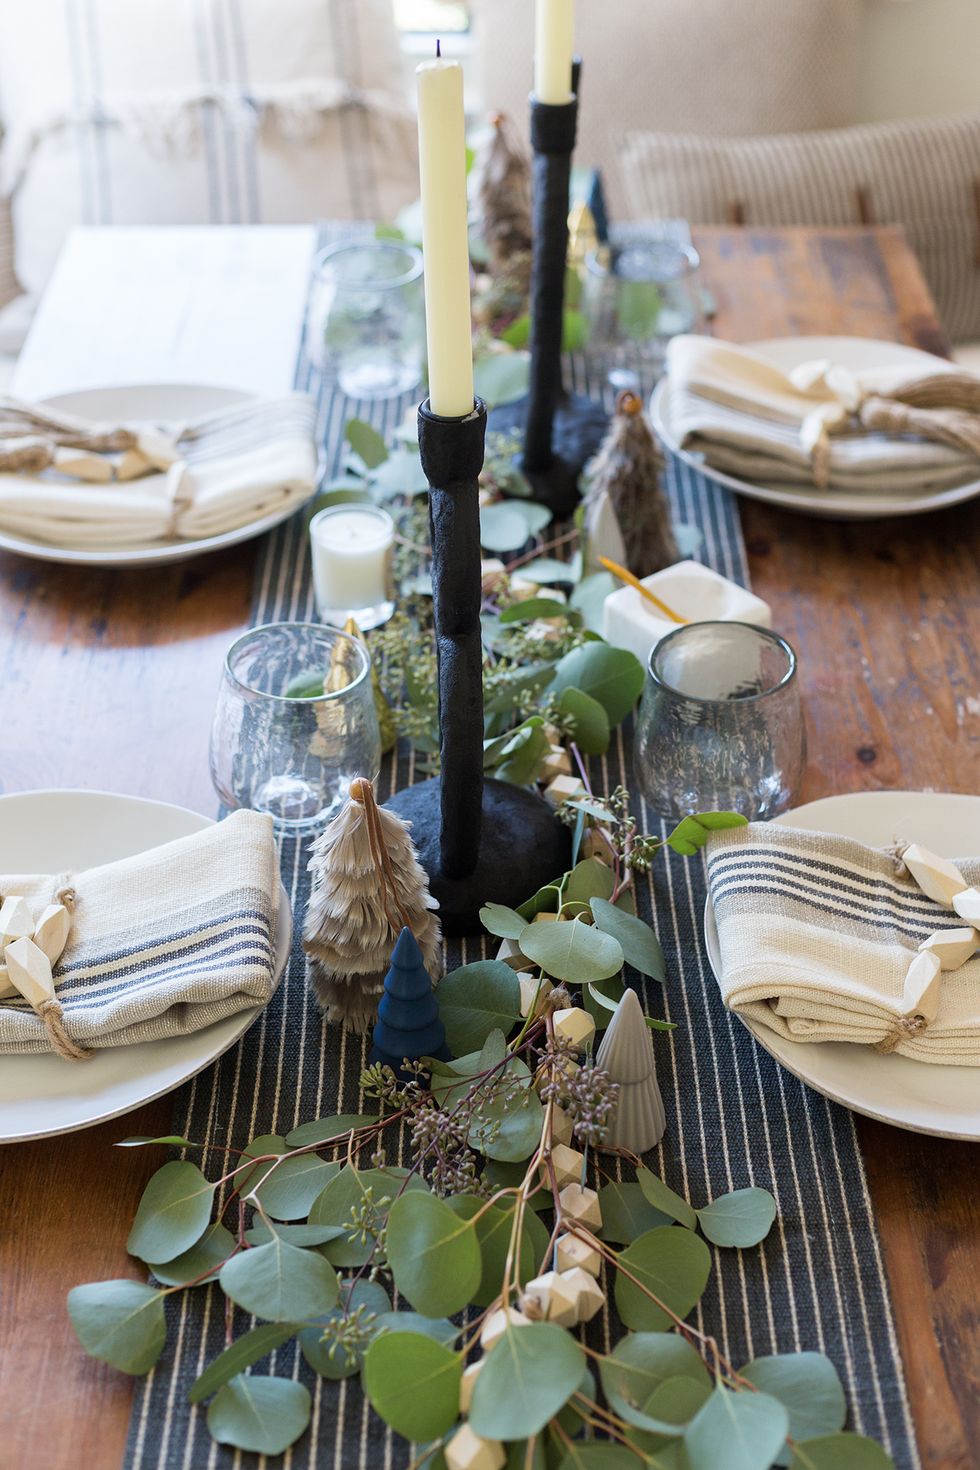 Mini tree and green table runner